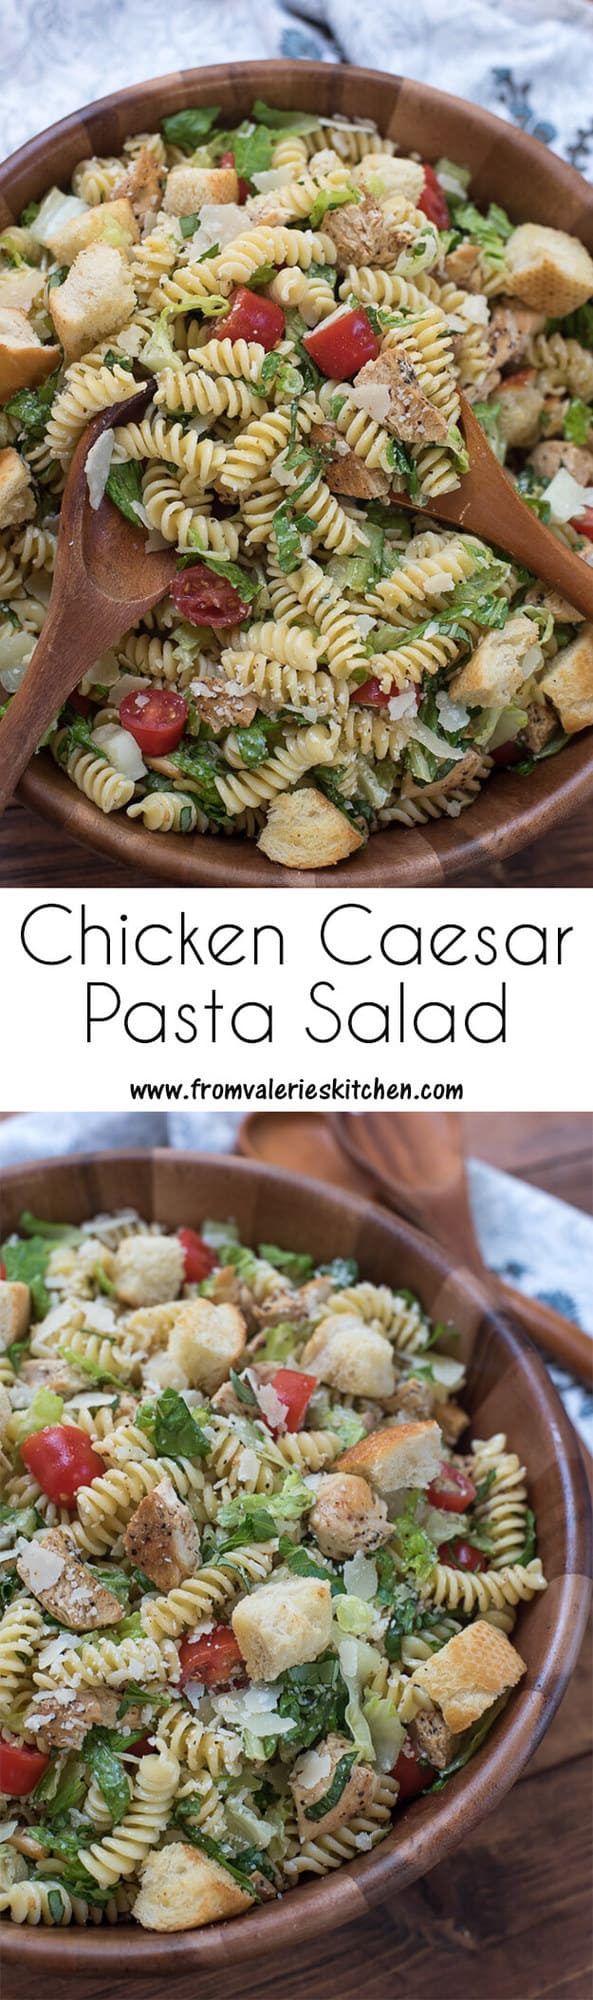 A two image vertical collage of Chicken Caesar Pasta Salad in a wooden serving bowl with overlay text.